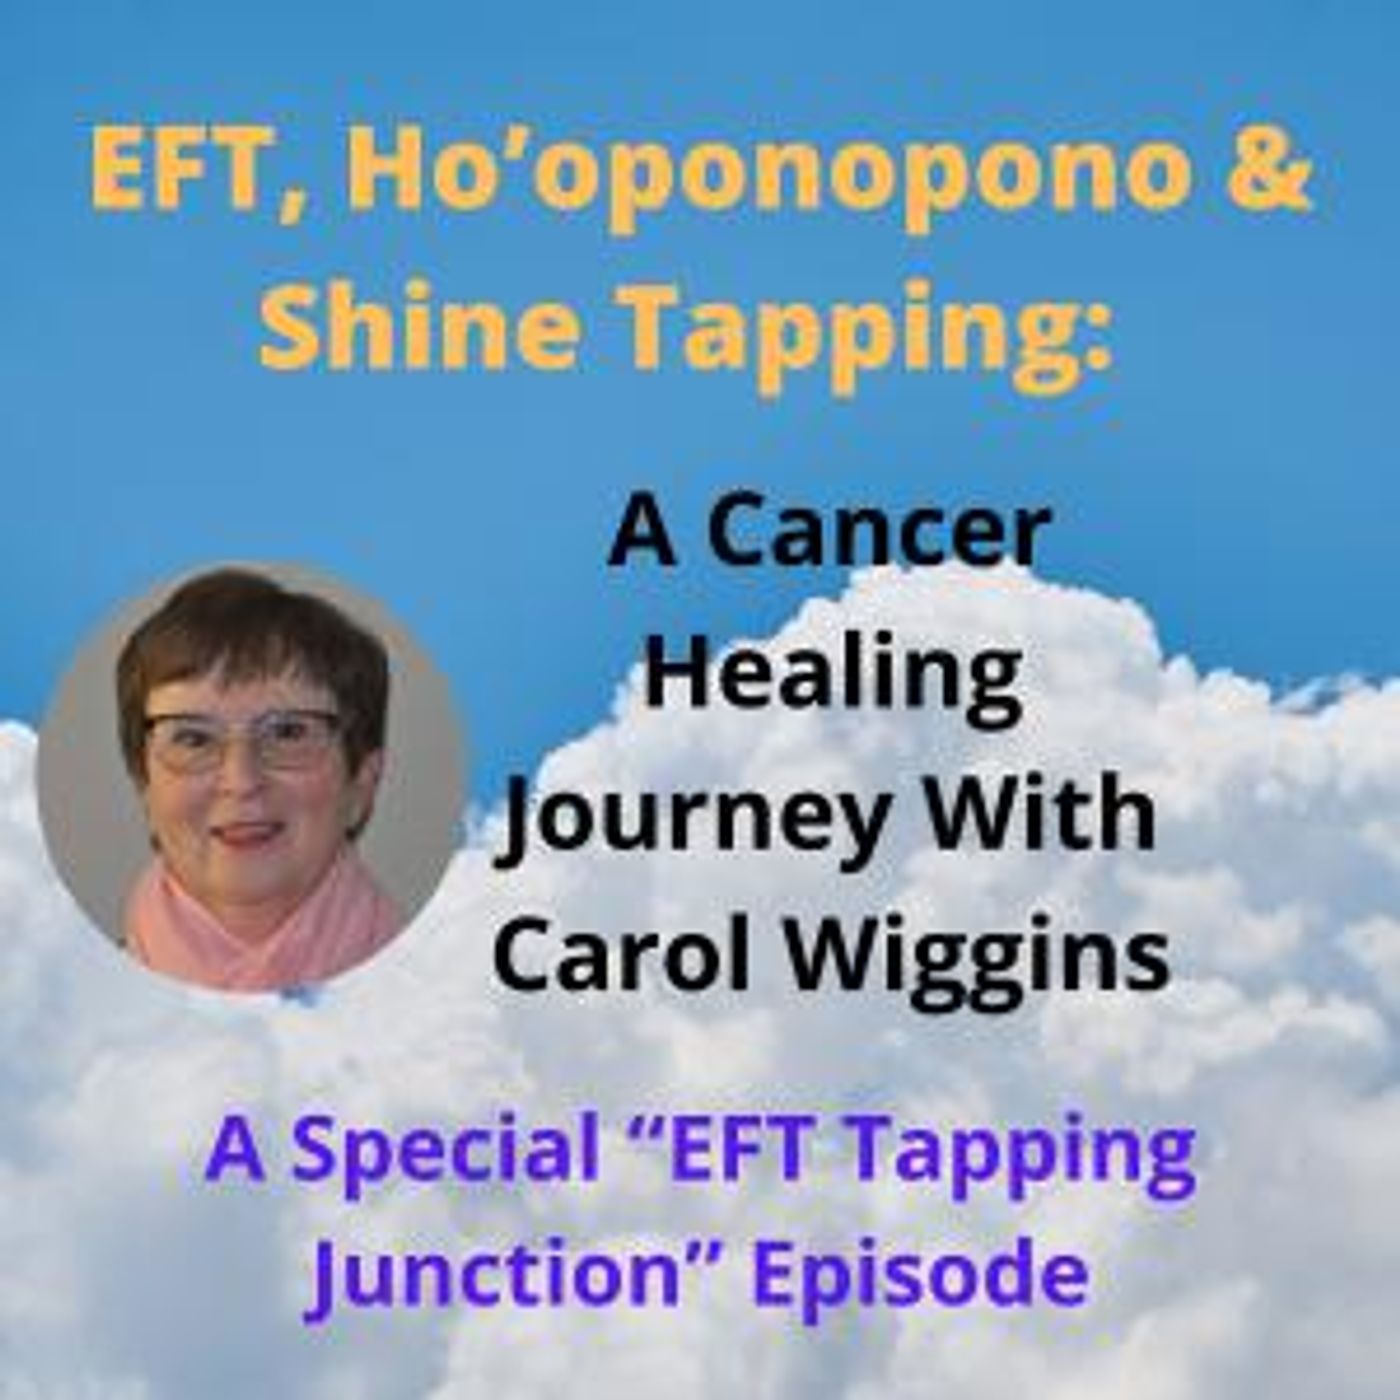 EFT, Ho’oponopono and Shine Tapping -  a Cancer Healing Journey With Carol Wiggins